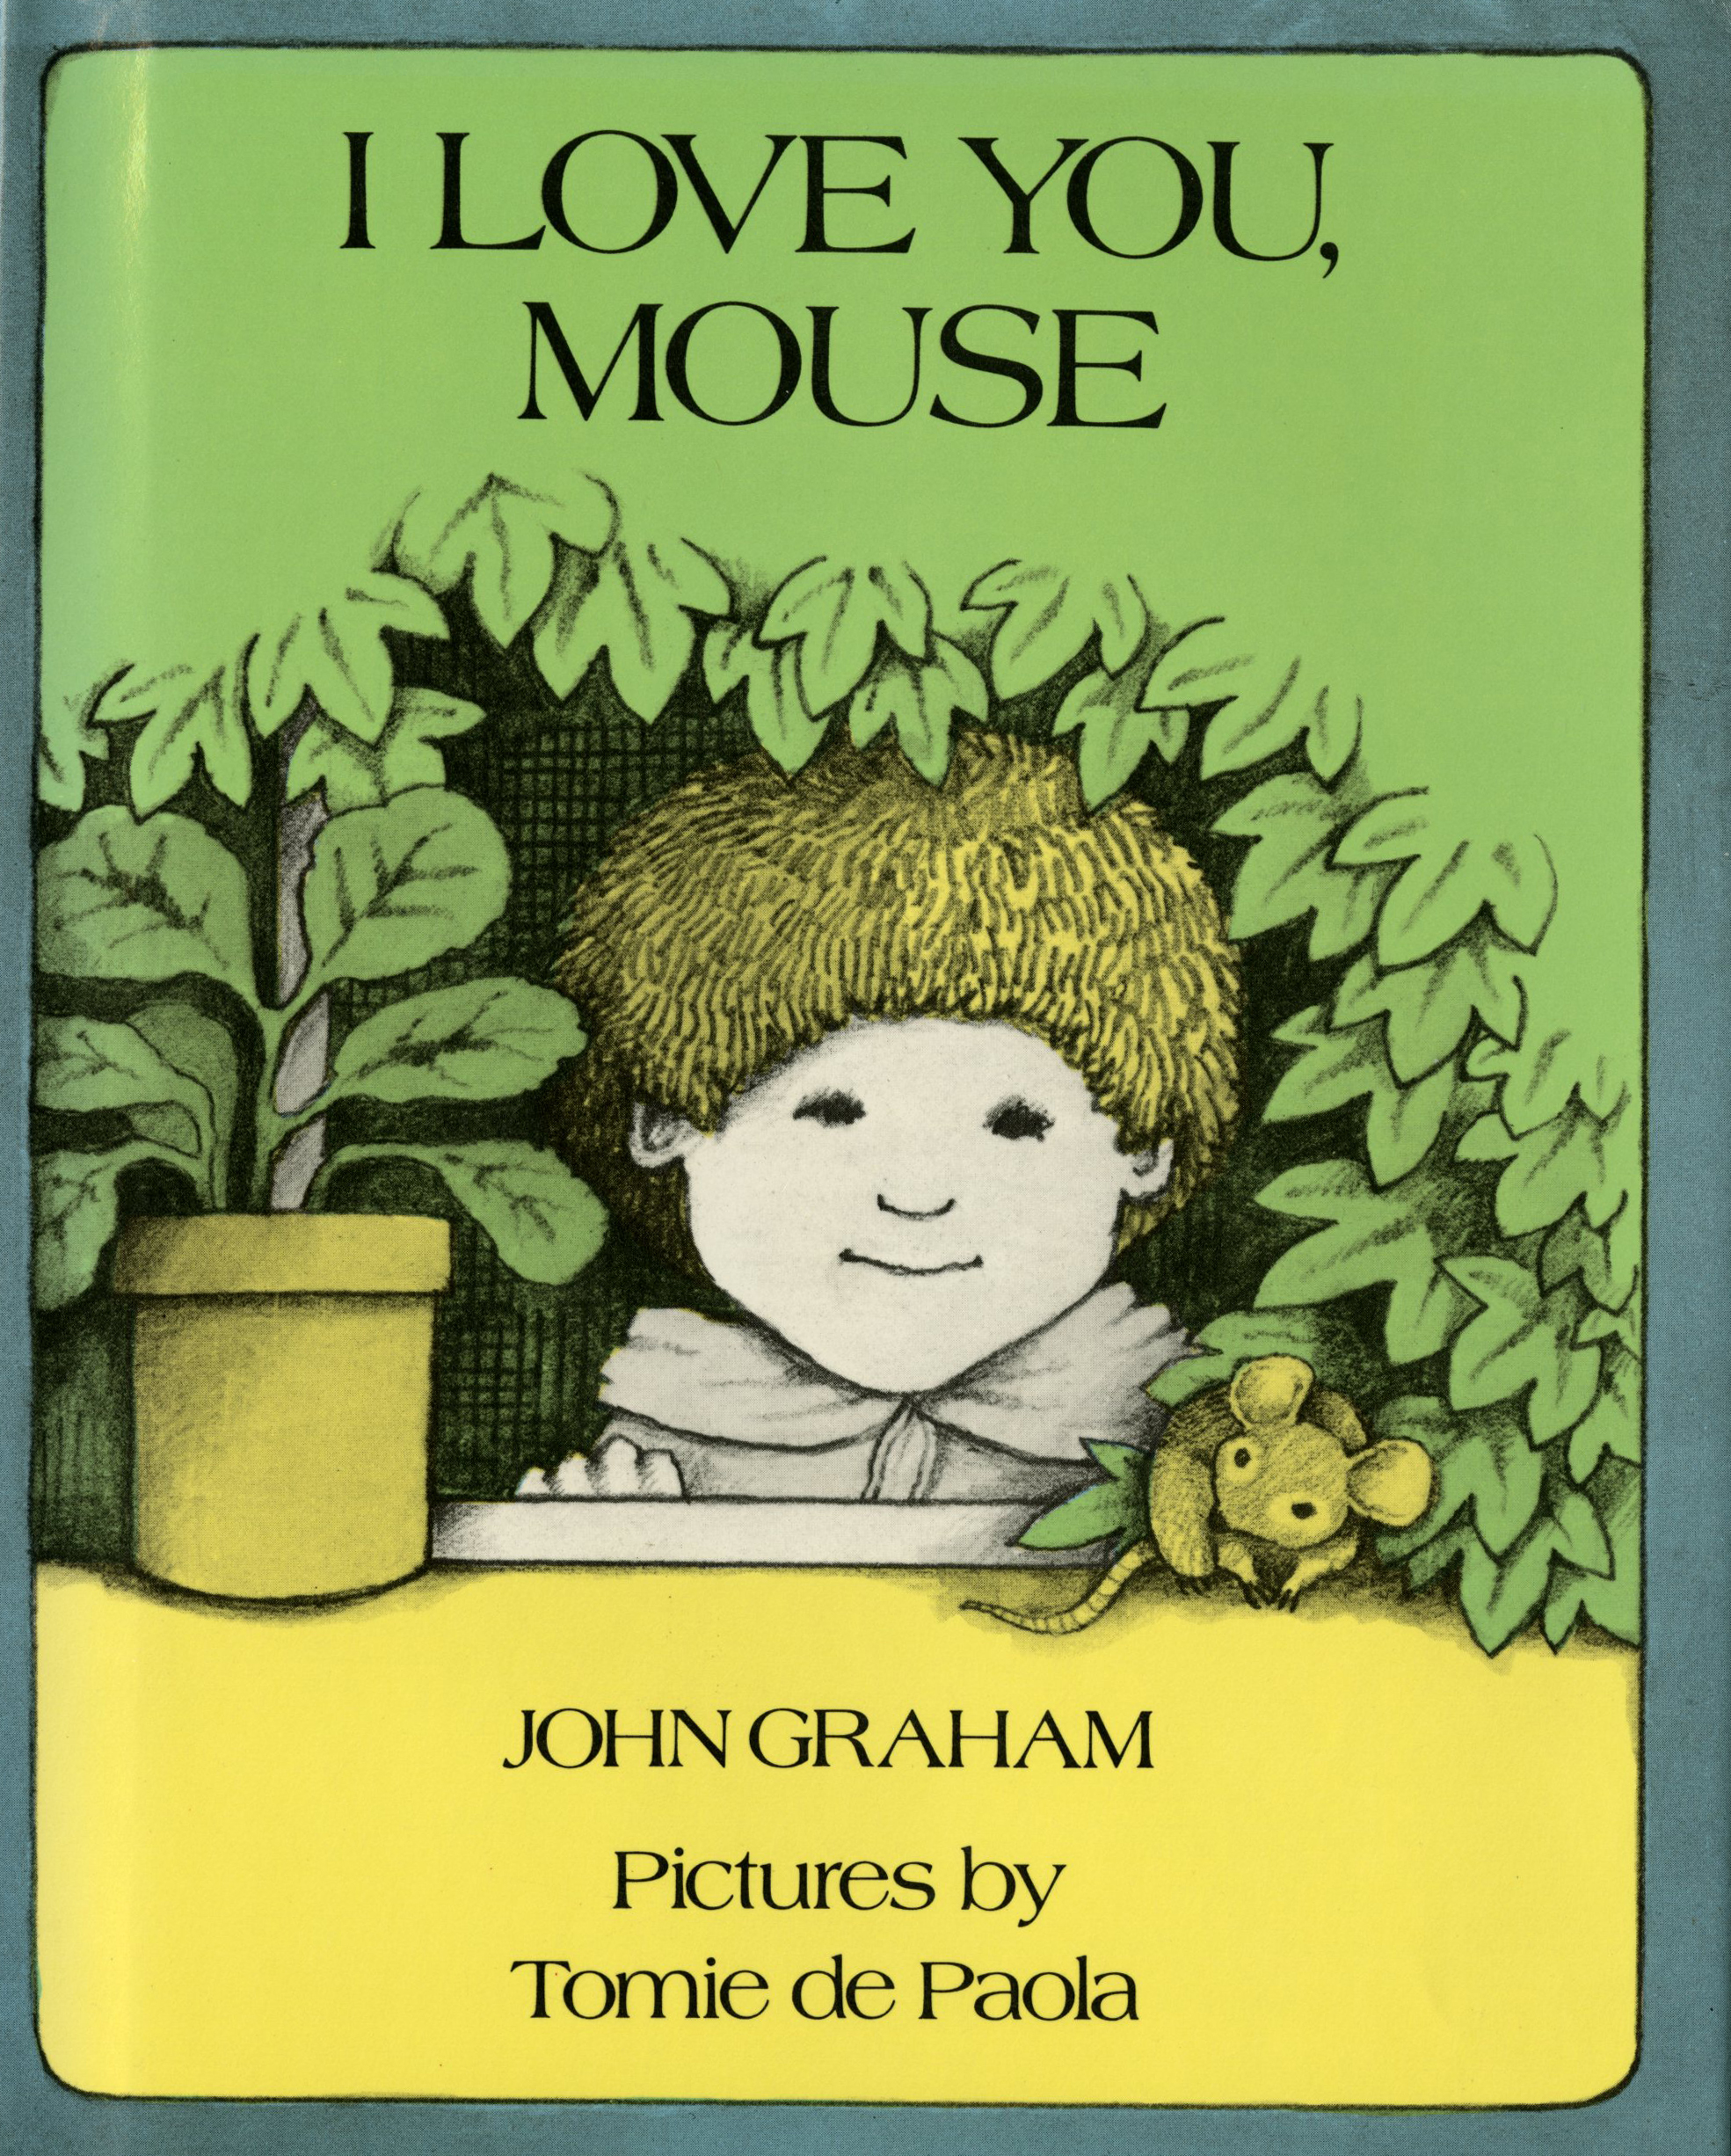 I Love You, Mouse Front Cover.jpg